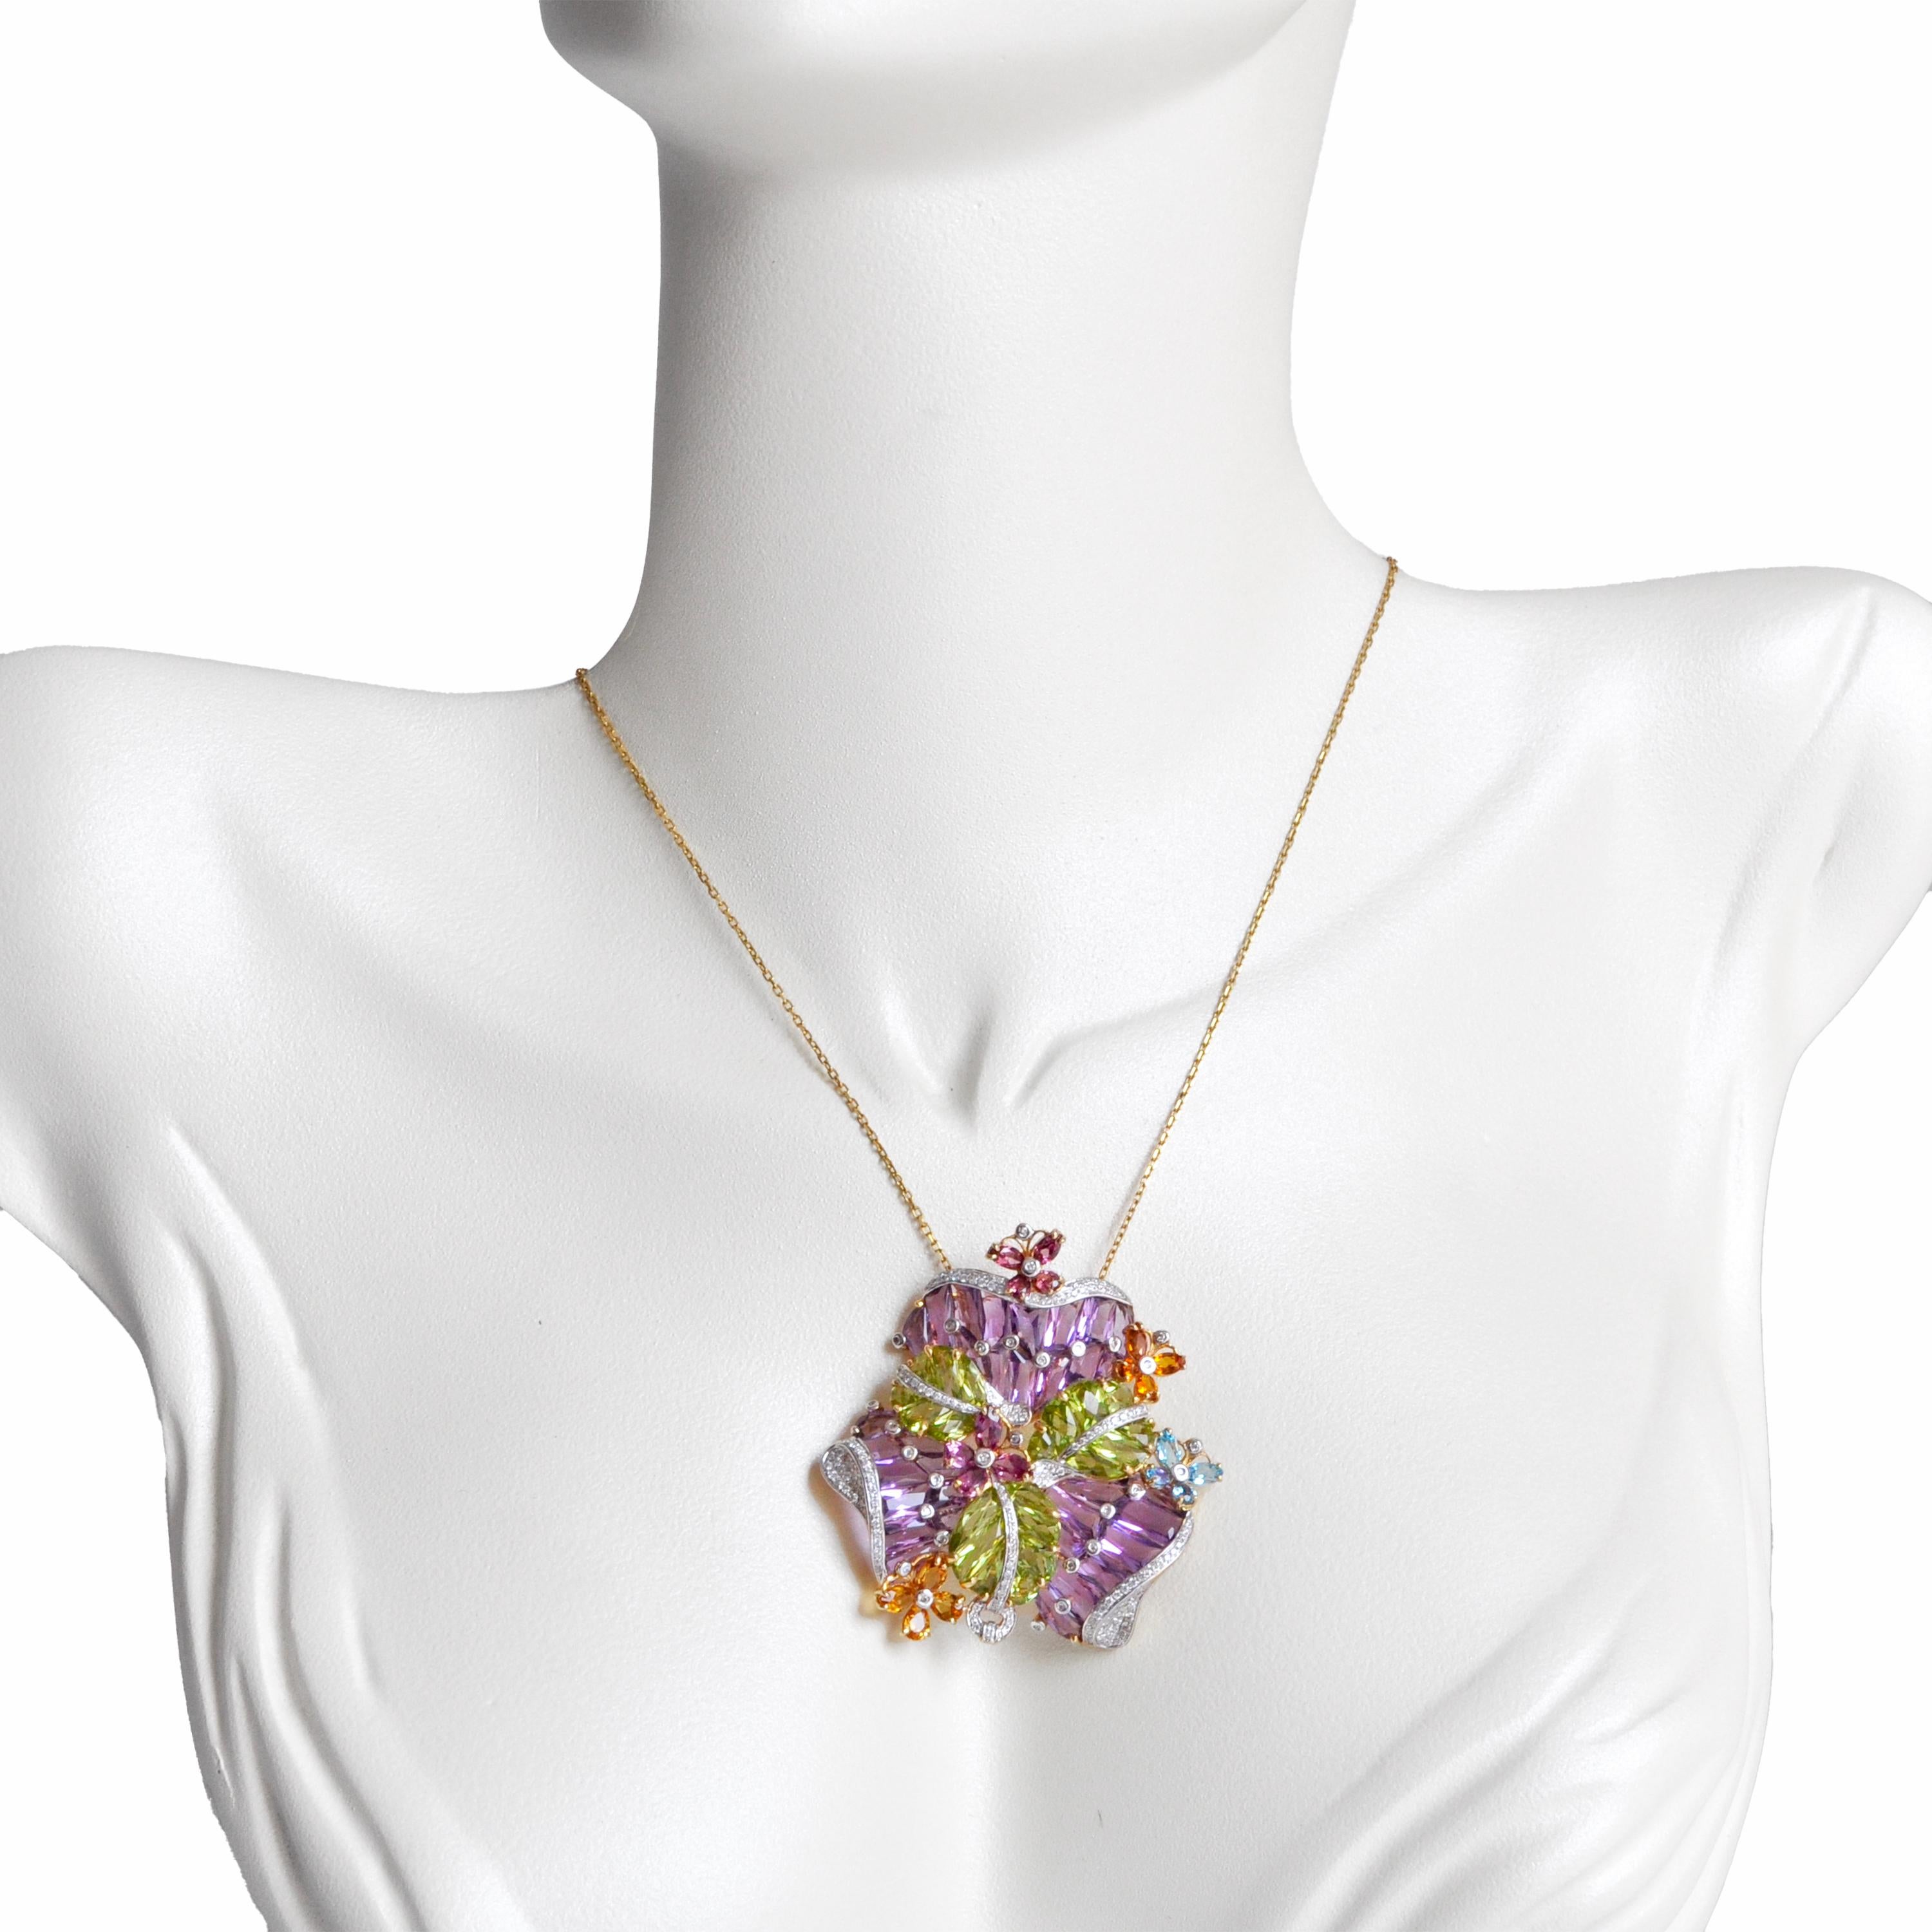 14 karat gold cocktail amethyst peridot citrine topaz tourmaline pendant brooch

Discover the Amethyst and Peridot Pendant Necklace, a masterpiece of color and design. This versatile piece seamlessly combines the regal allure of tapered baguette-cut